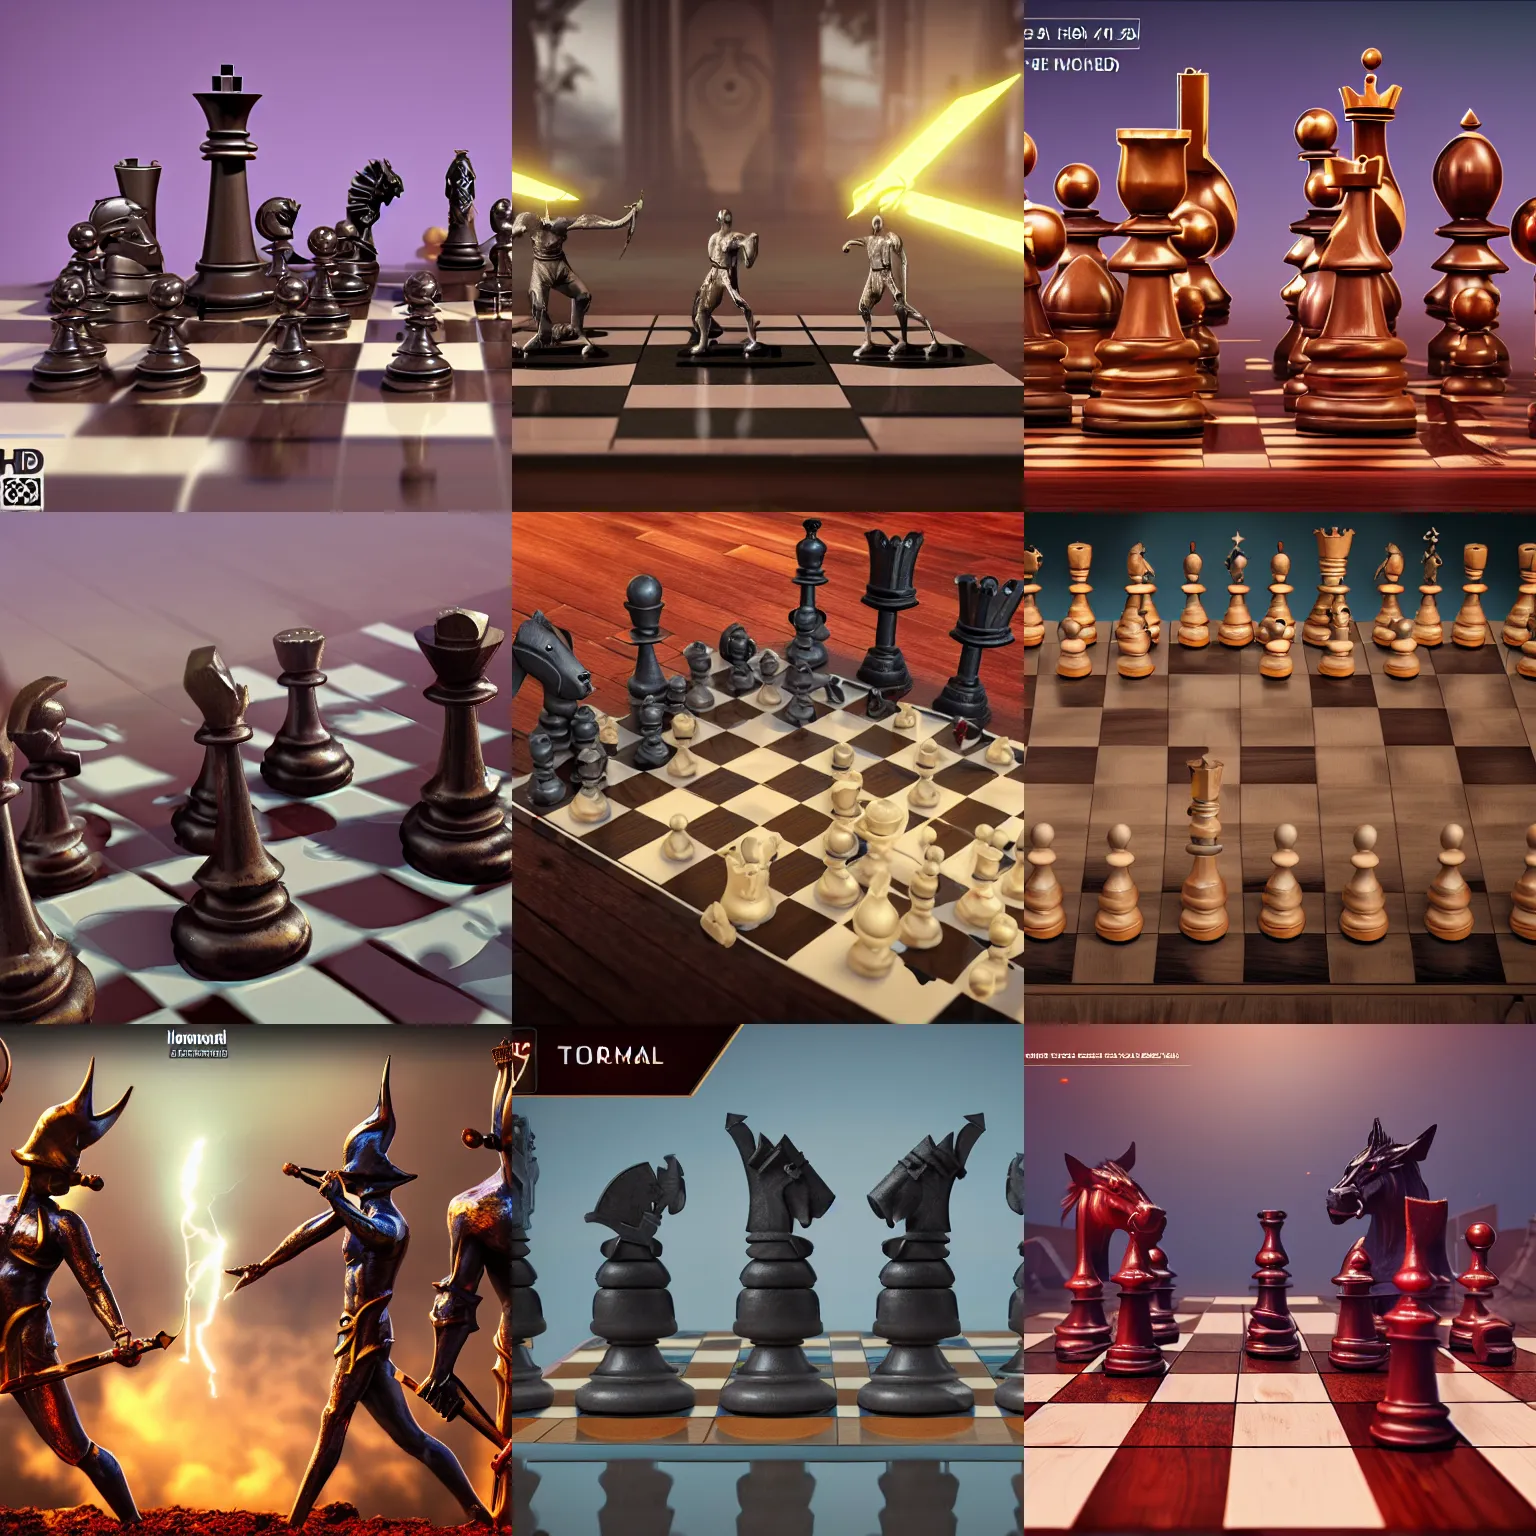 Creating chess game in Unreal Engine 5 